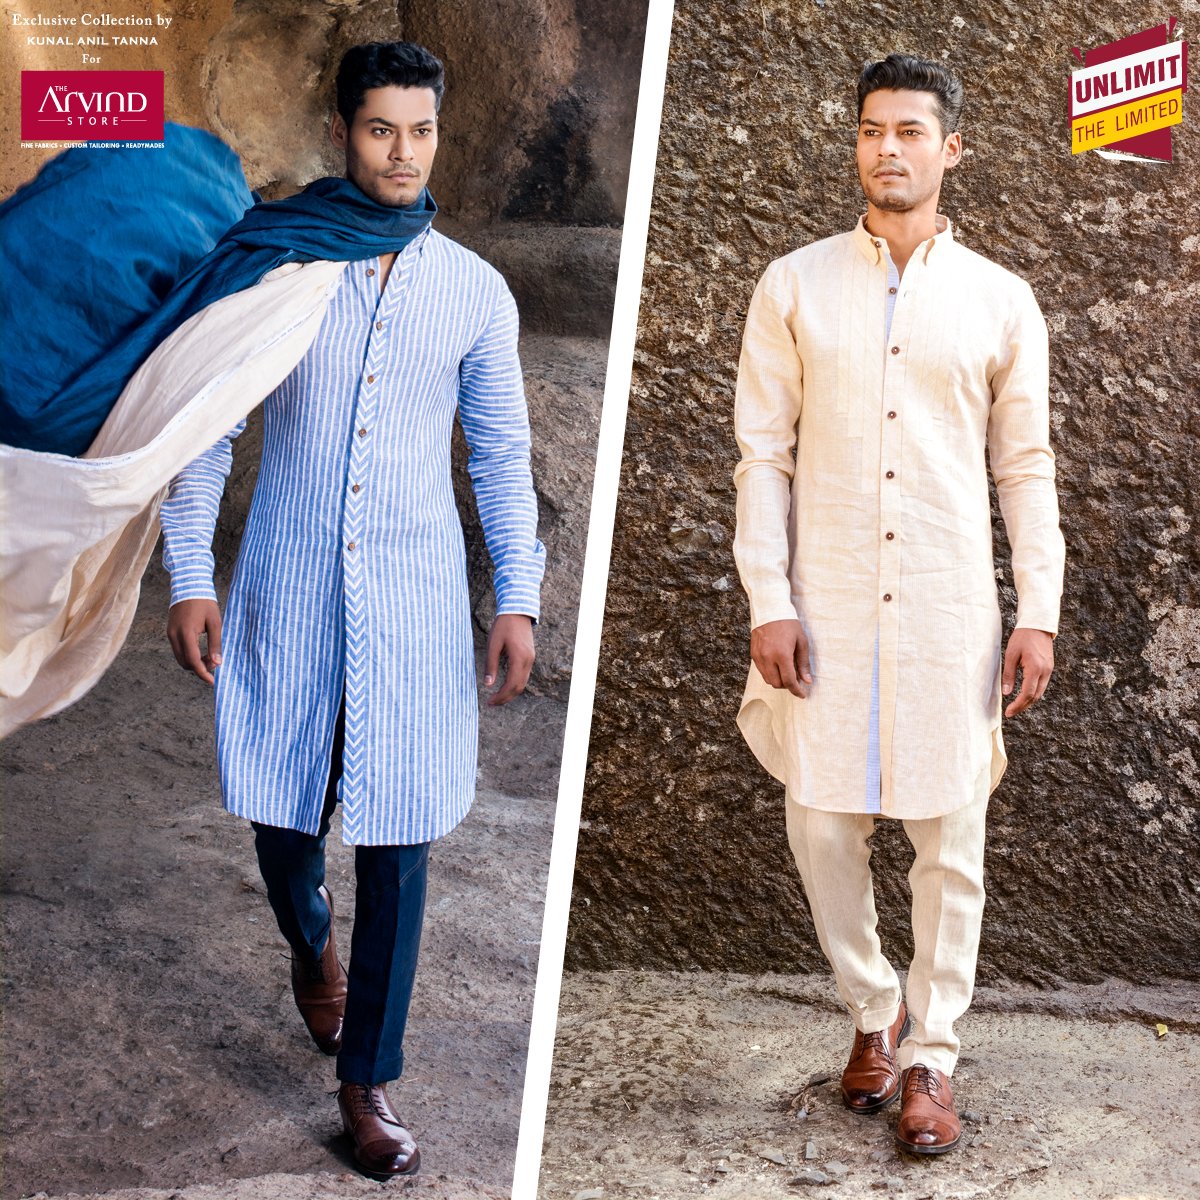 Flaunt the Global Indian look by giving your kurtas a contemporary twist. https://t.co/AIAnPgf08N #UnlimitTheLimited https://t.co/FXZK47bINn